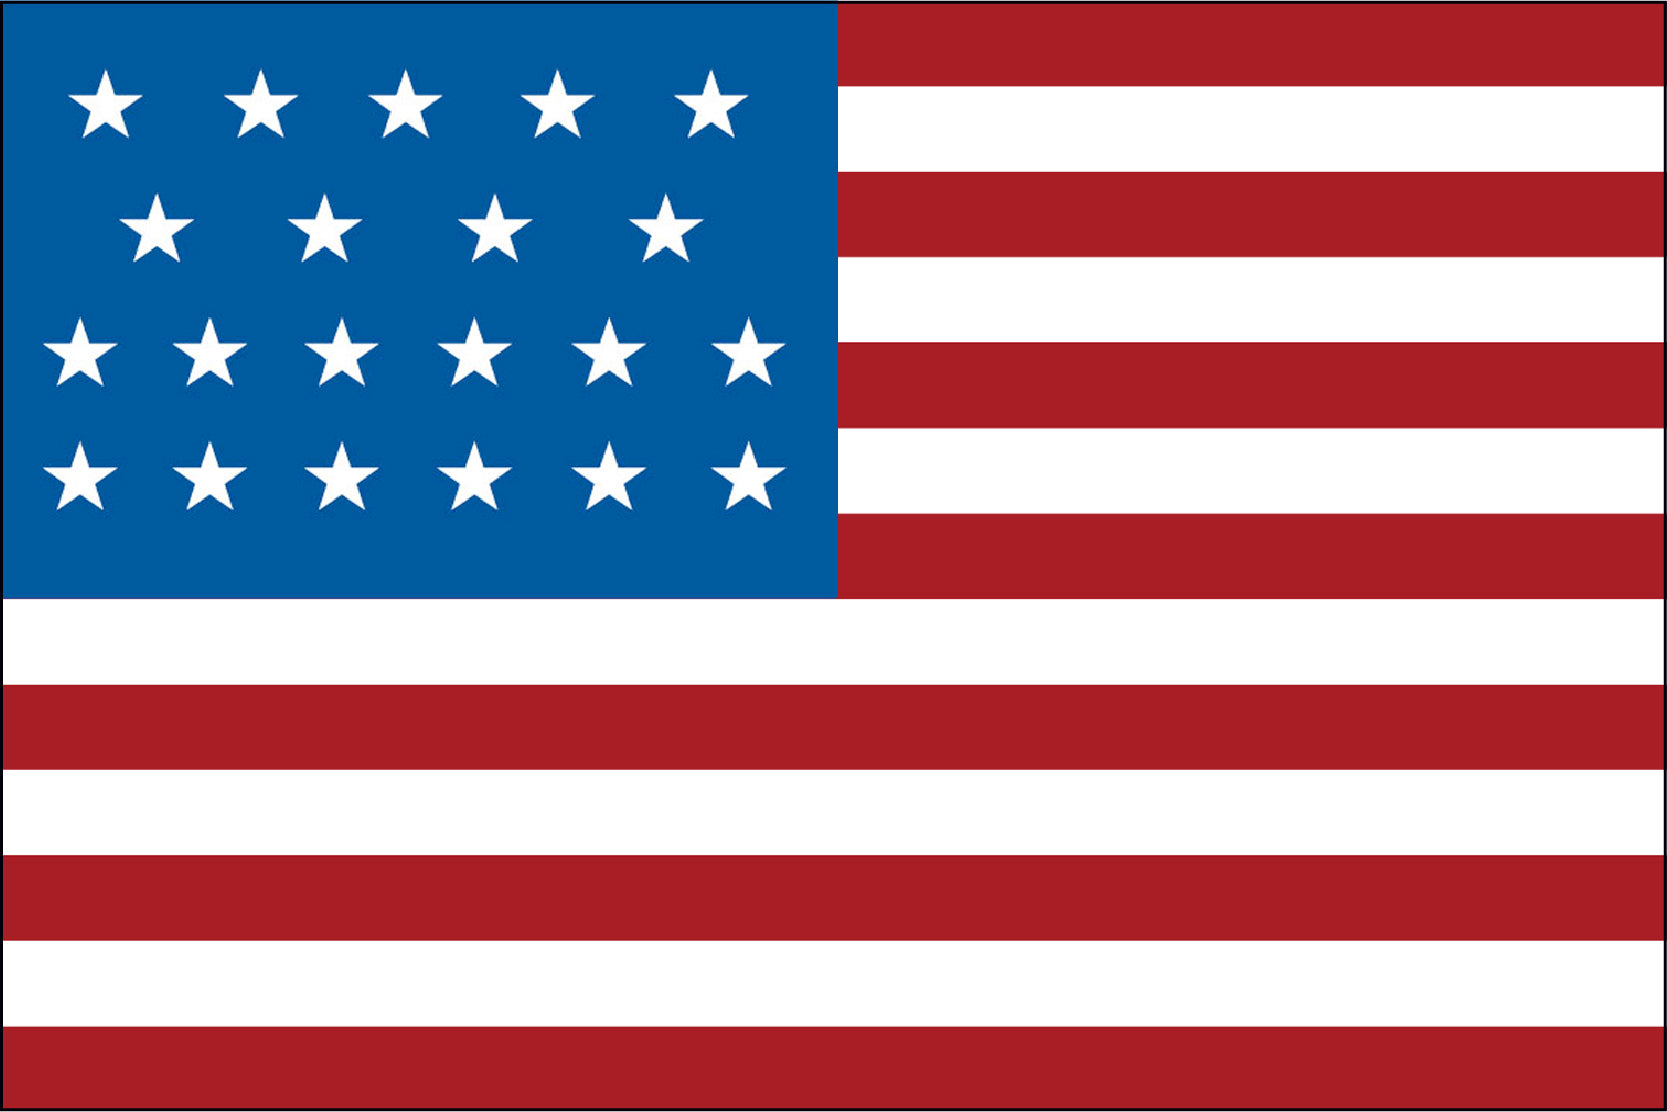 21 Star Old Glory Flag - LEAD TIMES ARE CURRENTLY RUNNING 6-8 WEEKS